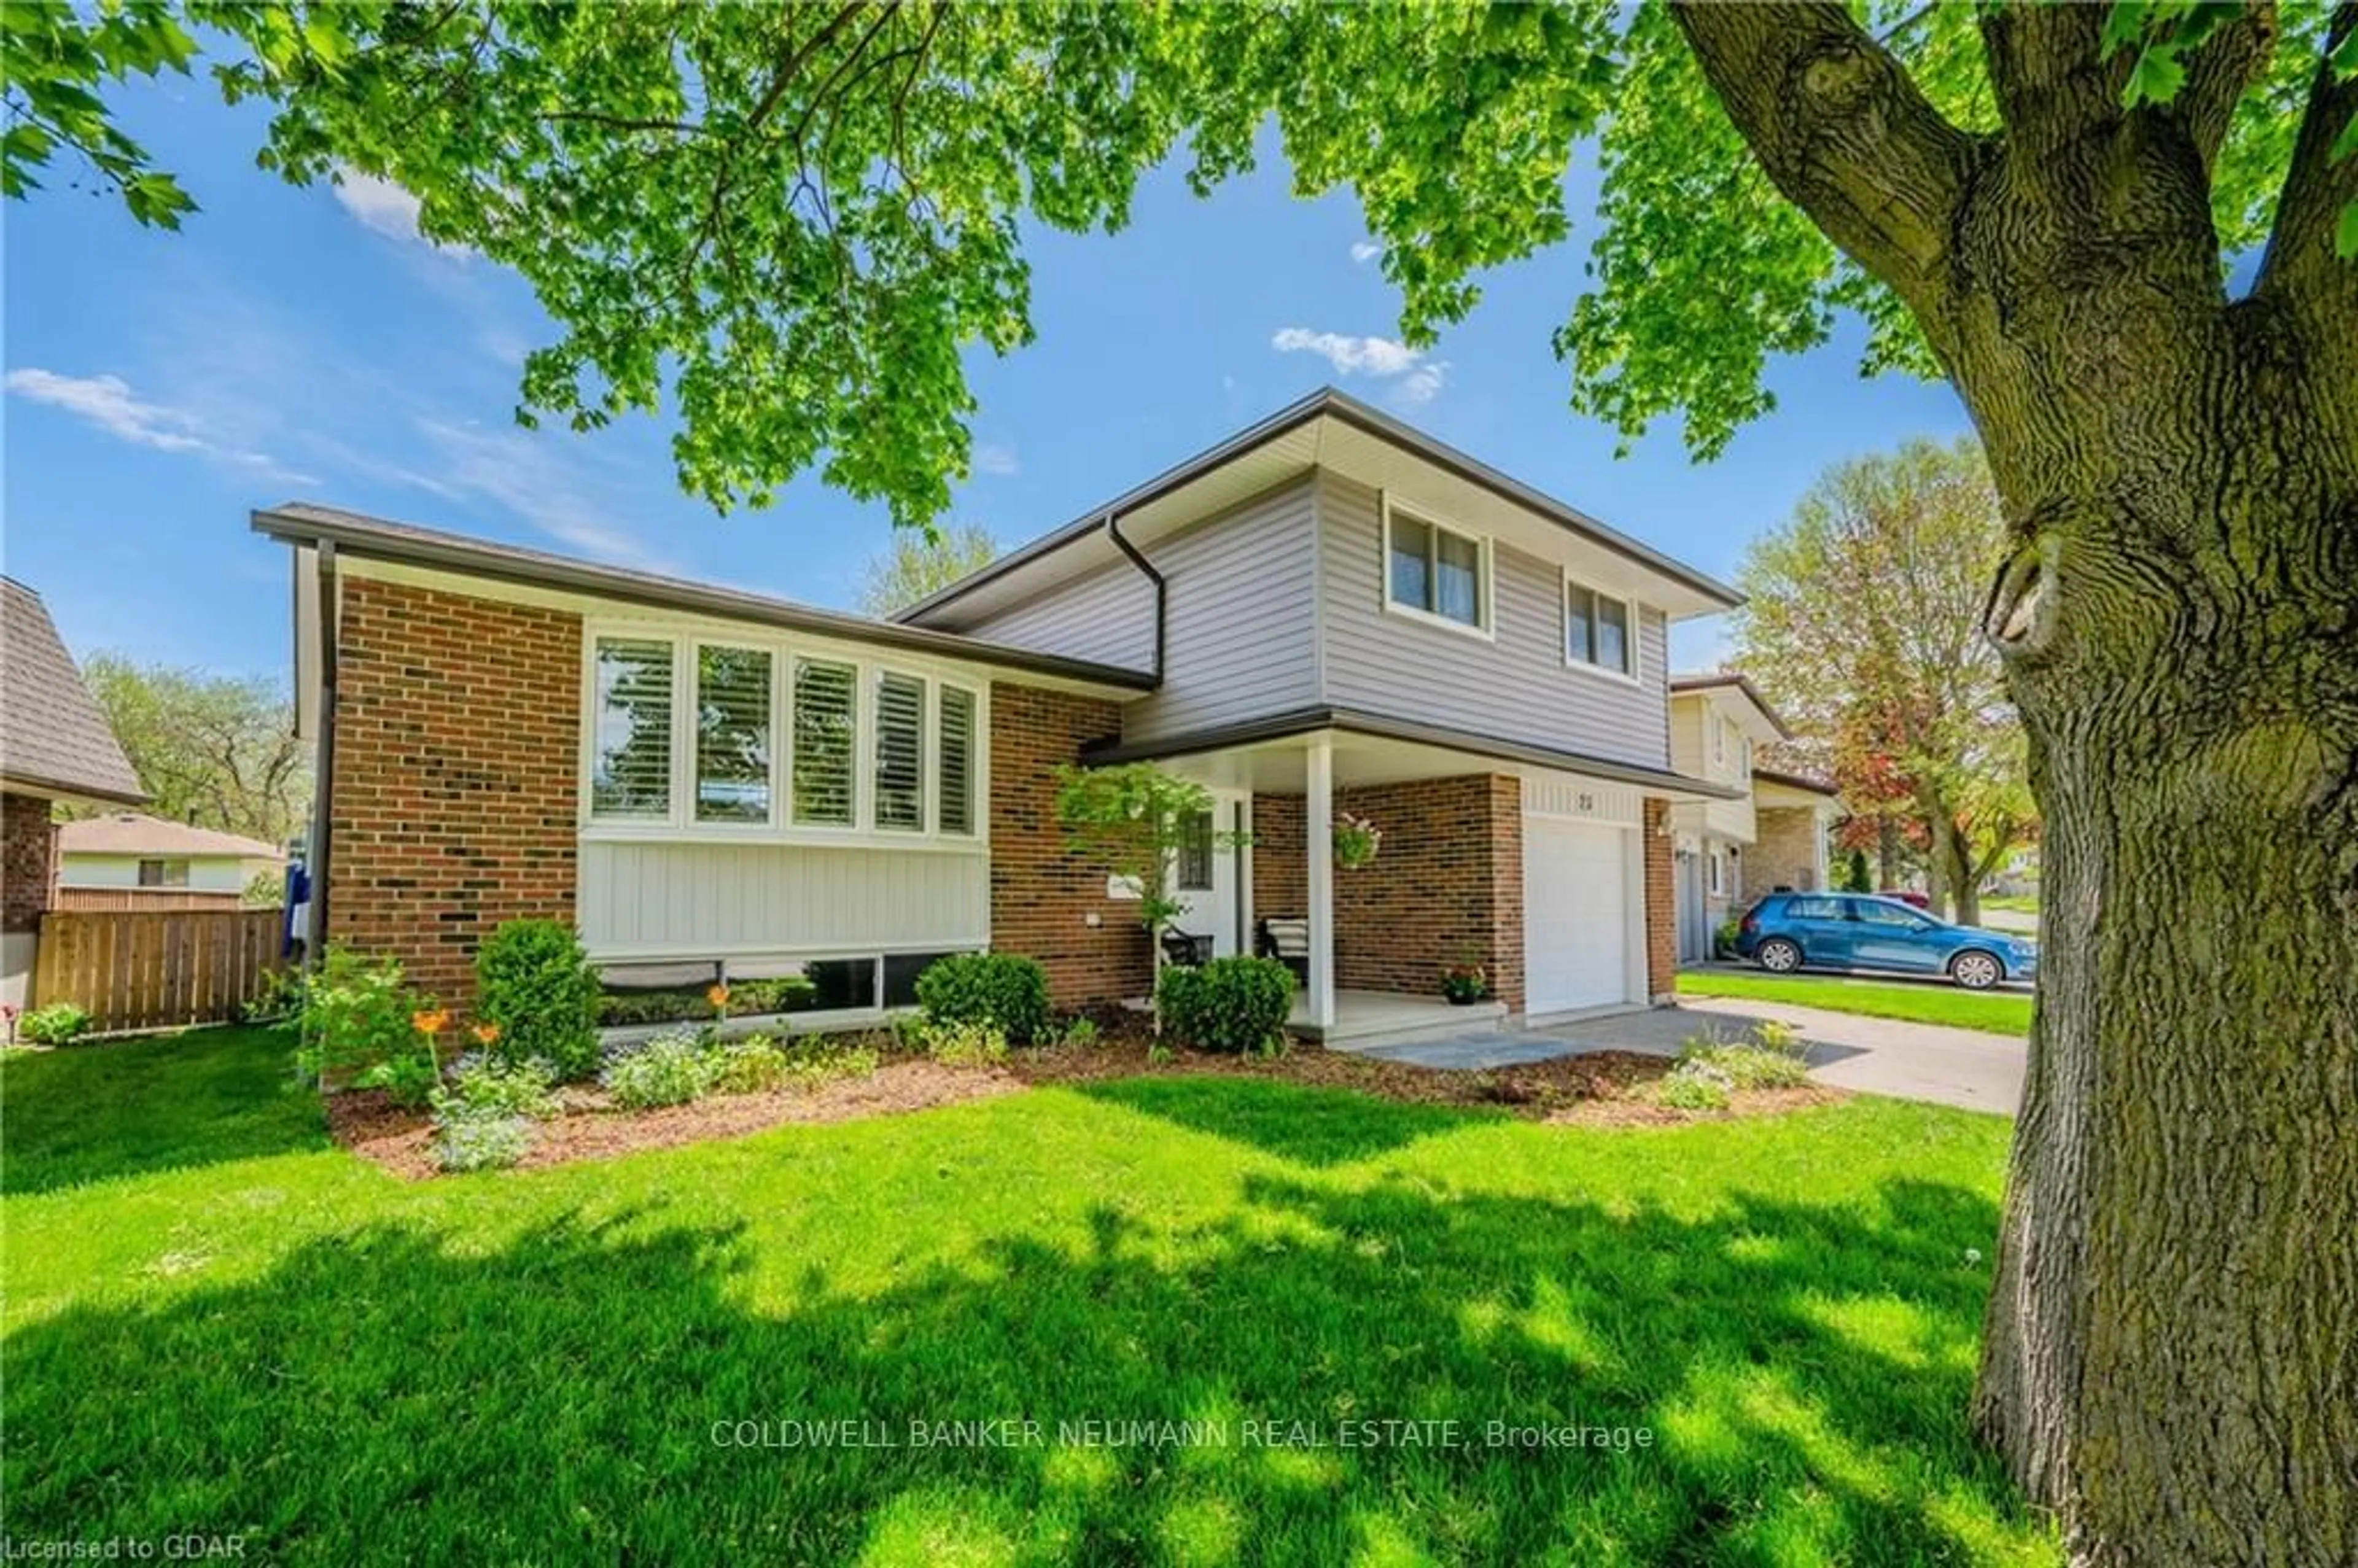 Home with brick exterior material for 23 Meadow Cres, Guelph Ontario N1H 6V1